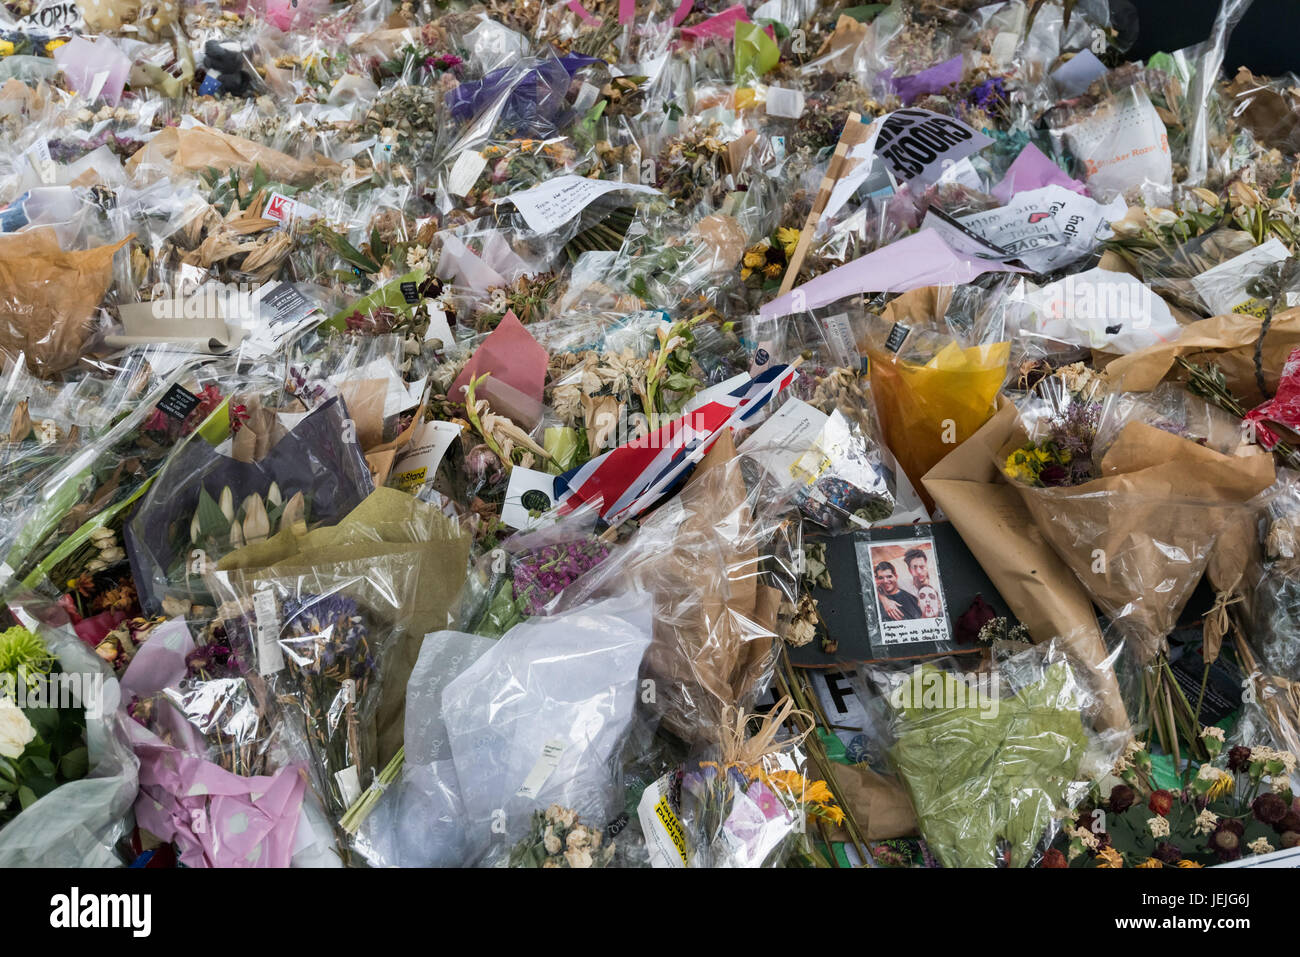 London, UK. 24th June, 2017. London, UK. 24th September 2017. A photograph and tributes in the huge pile of flowers remembering those killed in the London Bridge attack at the south end of London Bridge. Most of the flowers have now faded. Peter Marshall ImagesLive Credit: Peter Marshall/ImagesLive/ZUMA Wire/Alamy Live News Stock Photo